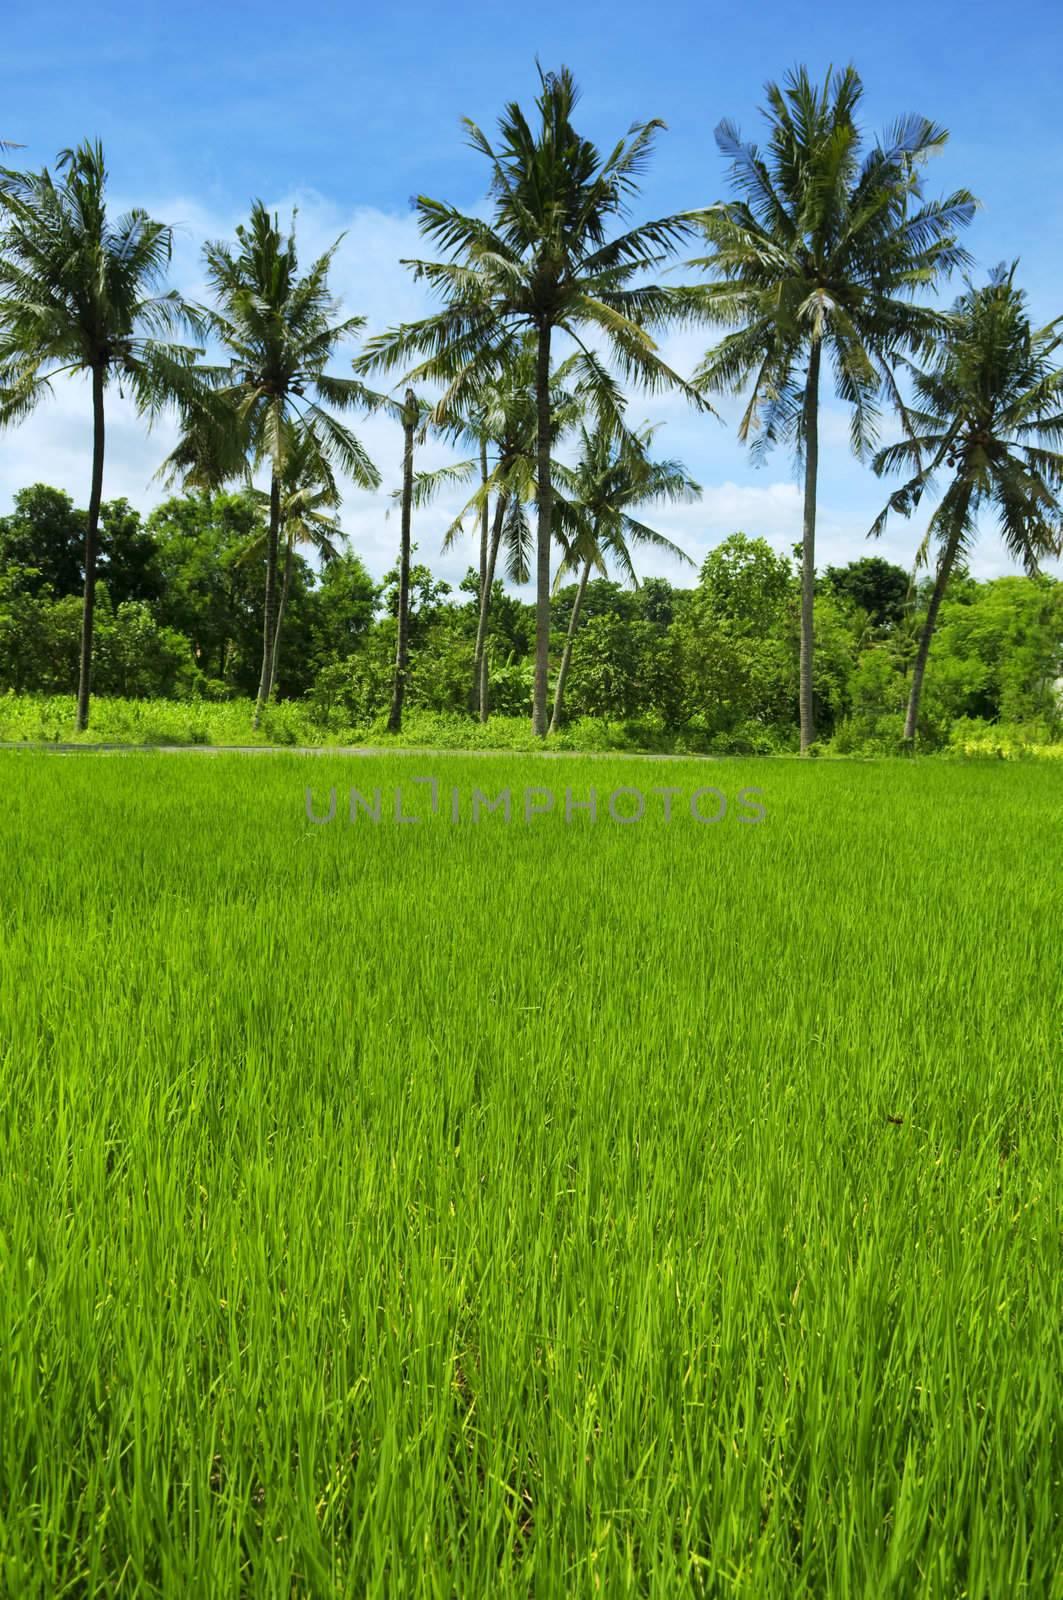 Rice field at Bali, Indonesia. Coconut tree as background.